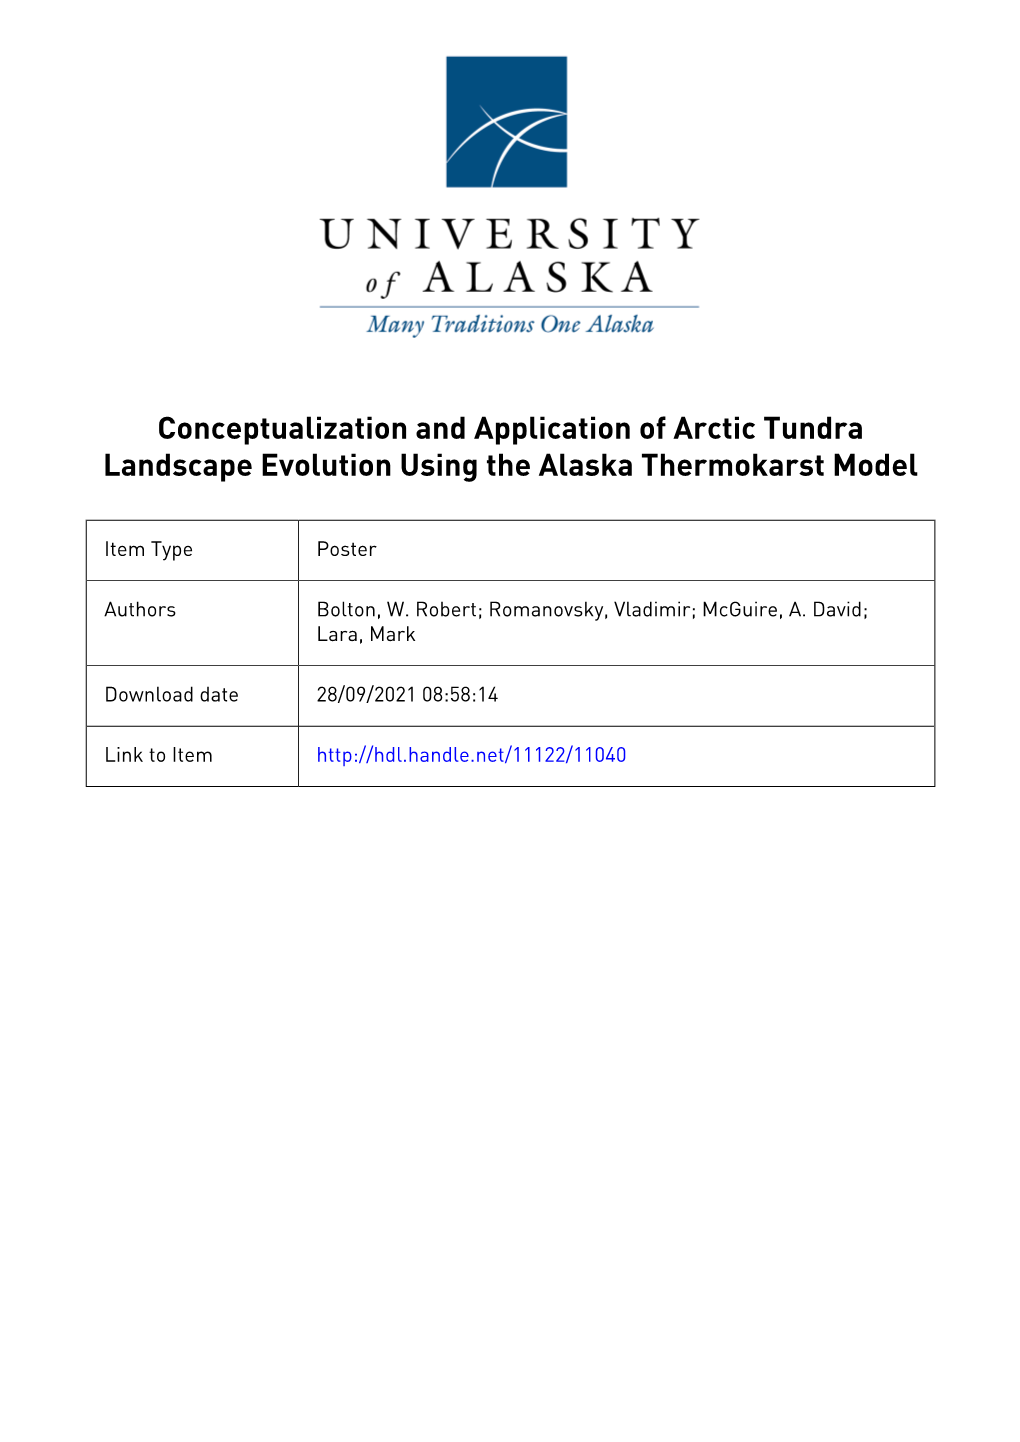 Conceptualization and Application of Arctic Tundra Landscape Evolution Using the Alaska Thermokarst Model